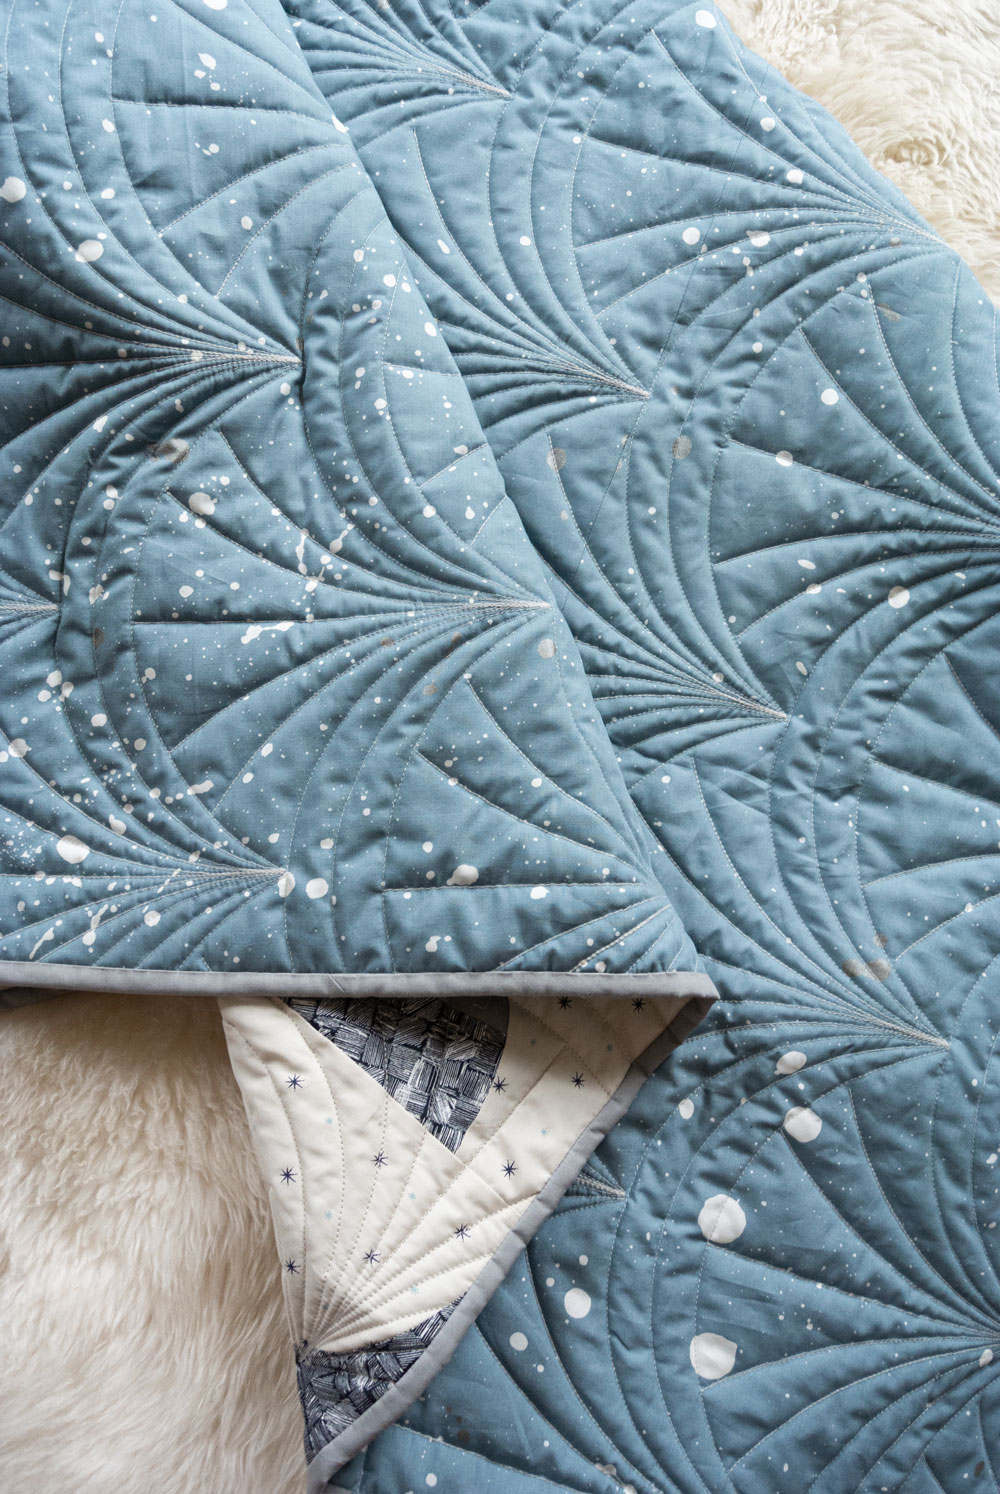 This Great Gatsby inspired Modern Fans quilt kit uses icy blues, grays and metallic silver fabric to bring elegance and pizzazz to a cozy quilt. suzyquilts.com #quiltpattern #quilt #modernquiltpattern